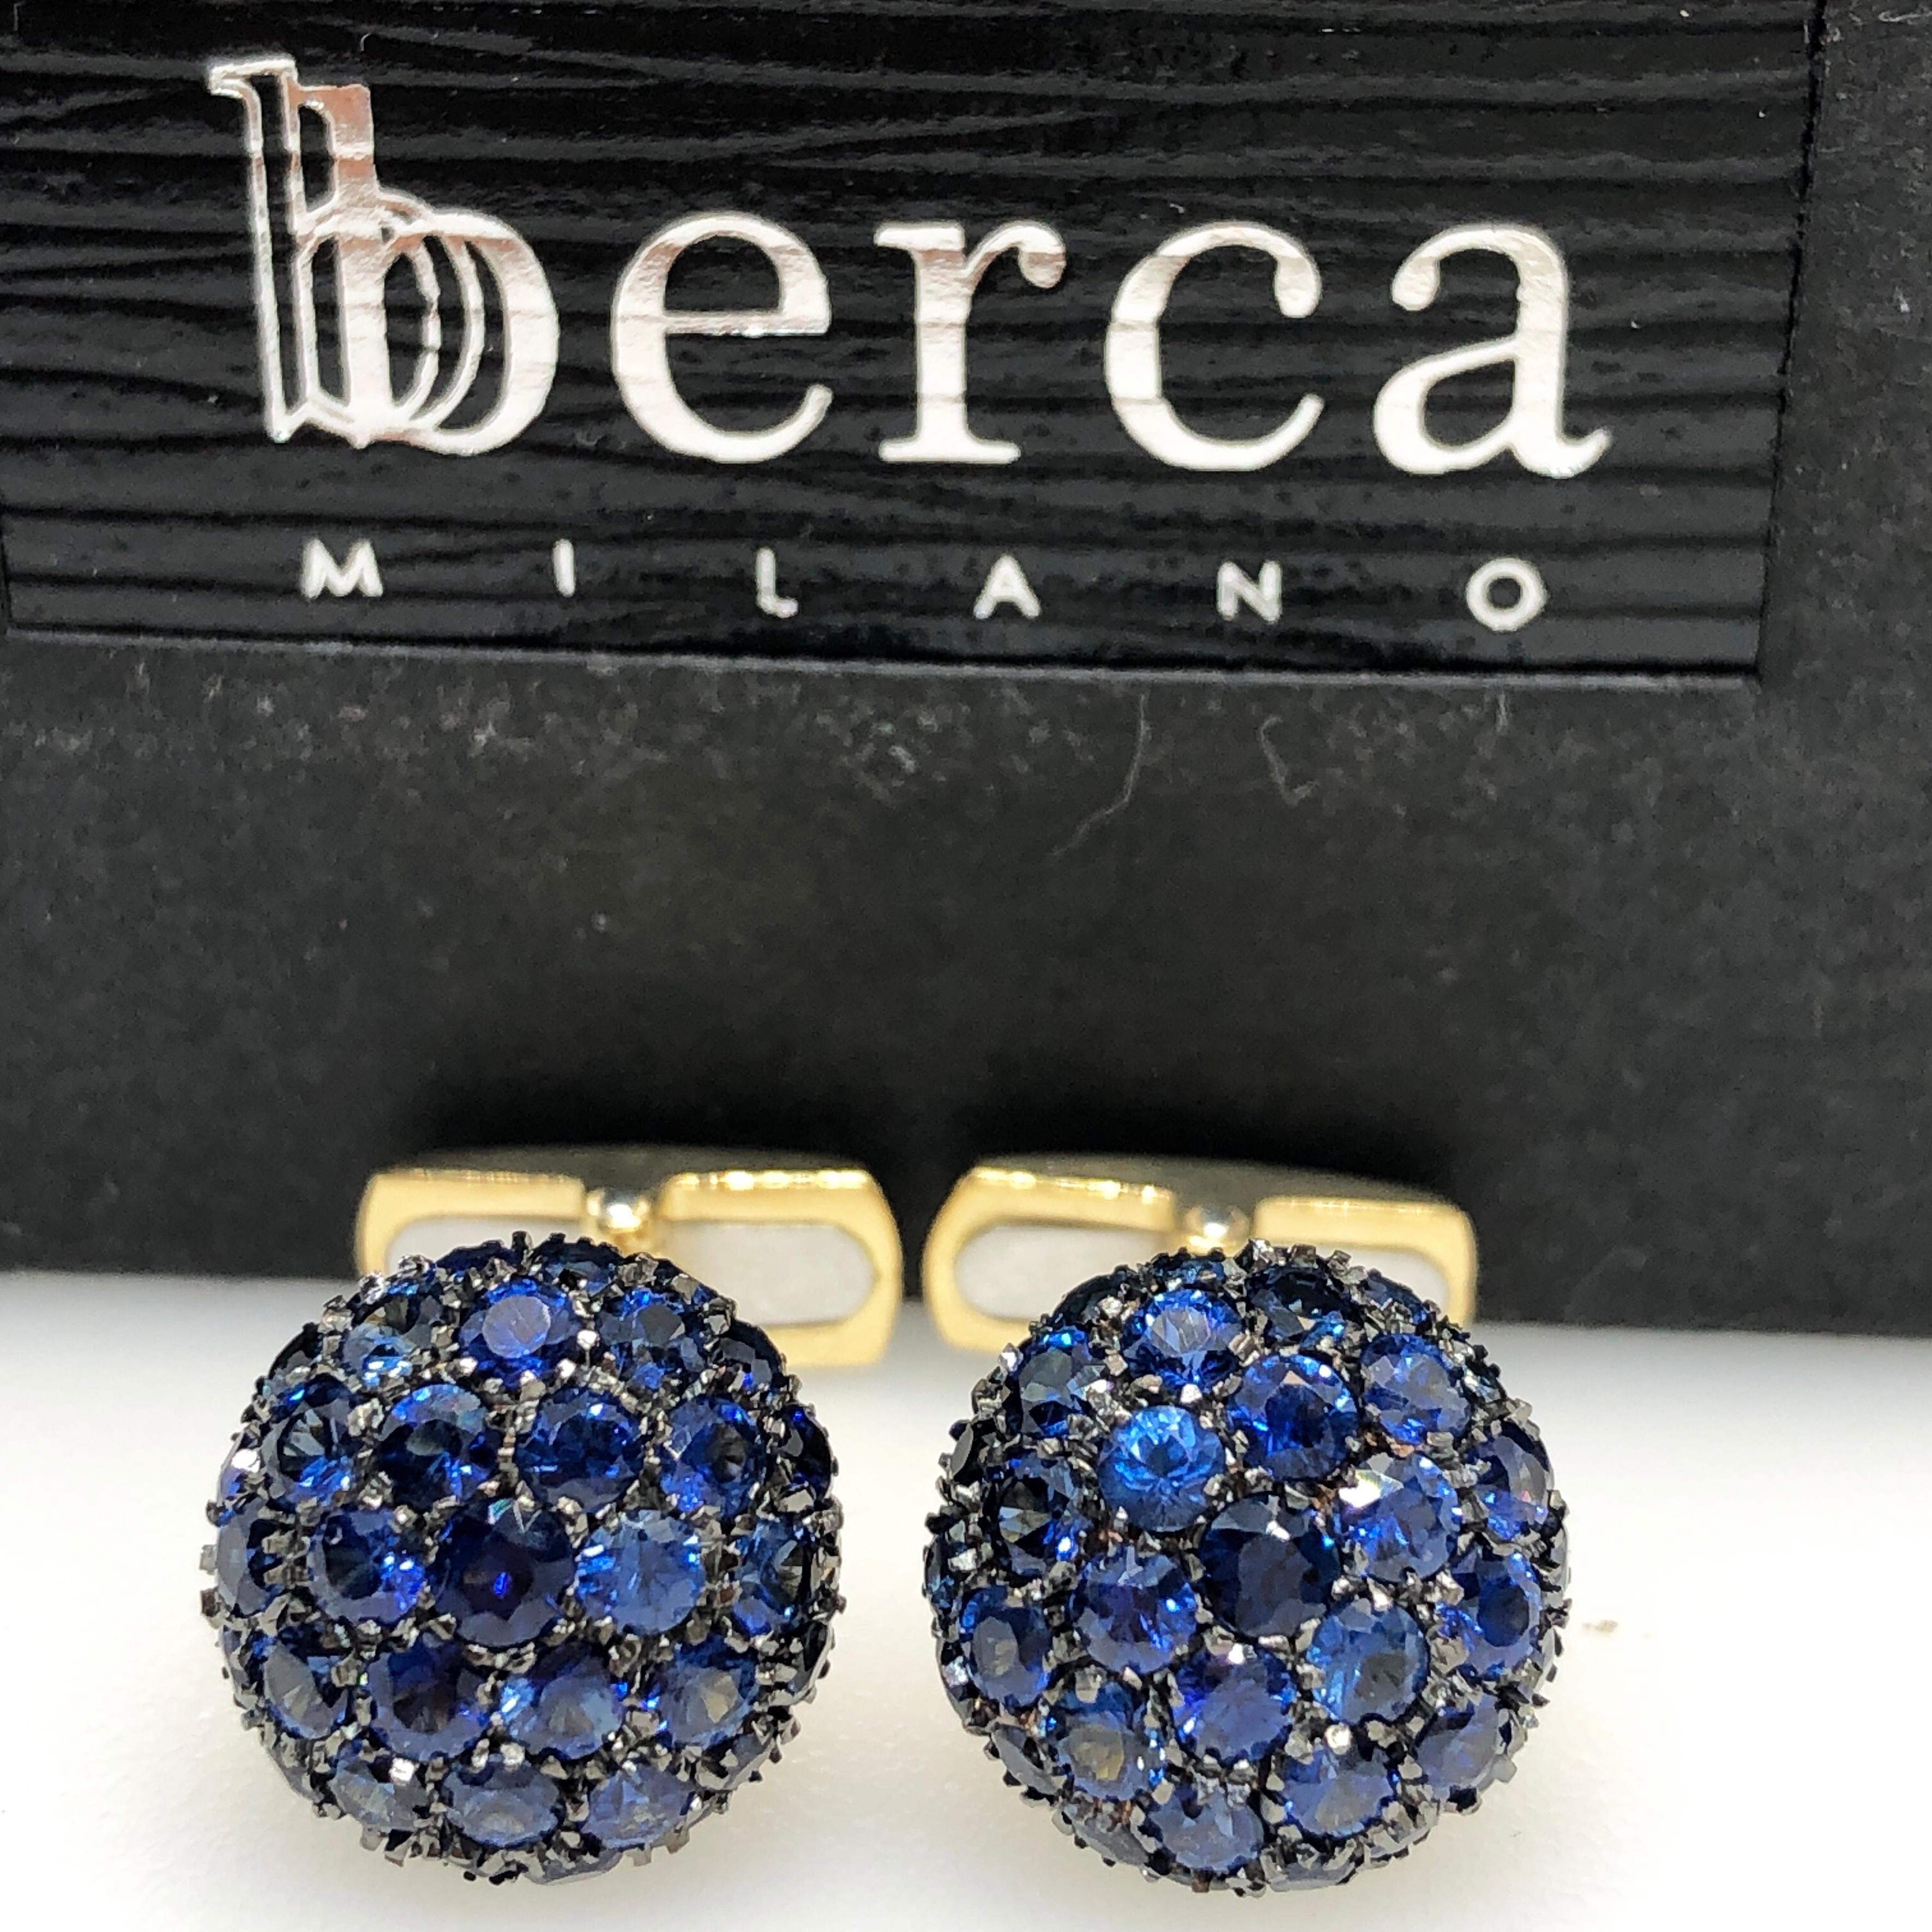 Absolutely Chic, Smart yet Timeless 4.97 Carat Natural Round Blue Sapphire in a 0.36 OzT 18Kt Oxidized Black and Yellow Gold Setting, easy to wear T-Bar Back.
In our fitted black box and pouch.
